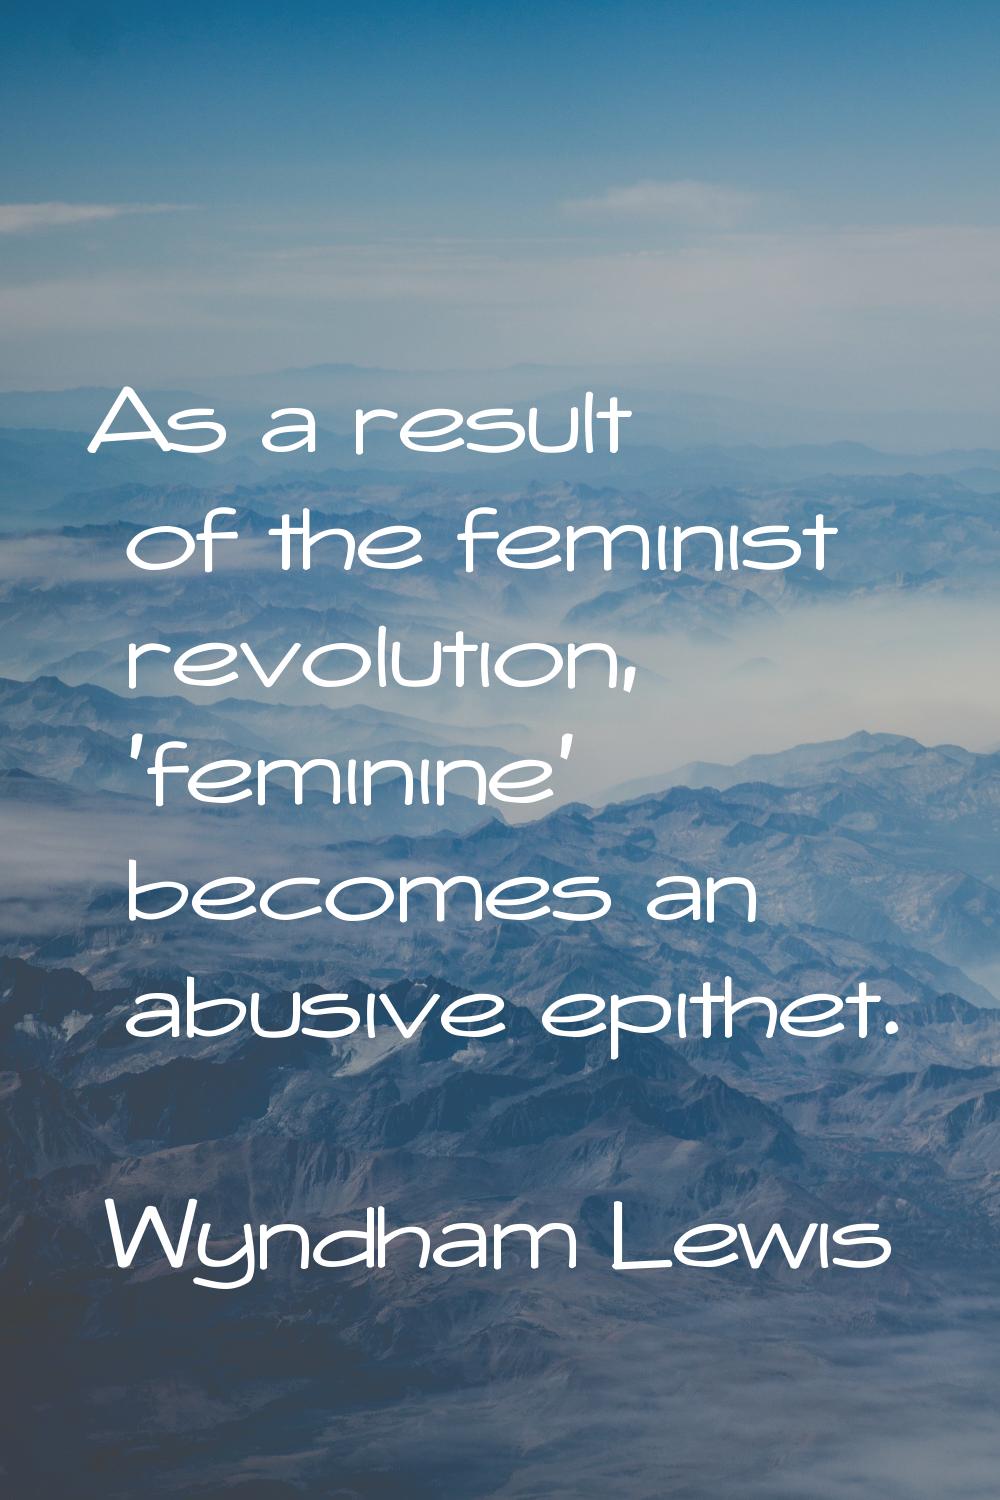 As a result of the feminist revolution, 'feminine' becomes an abusive epithet.